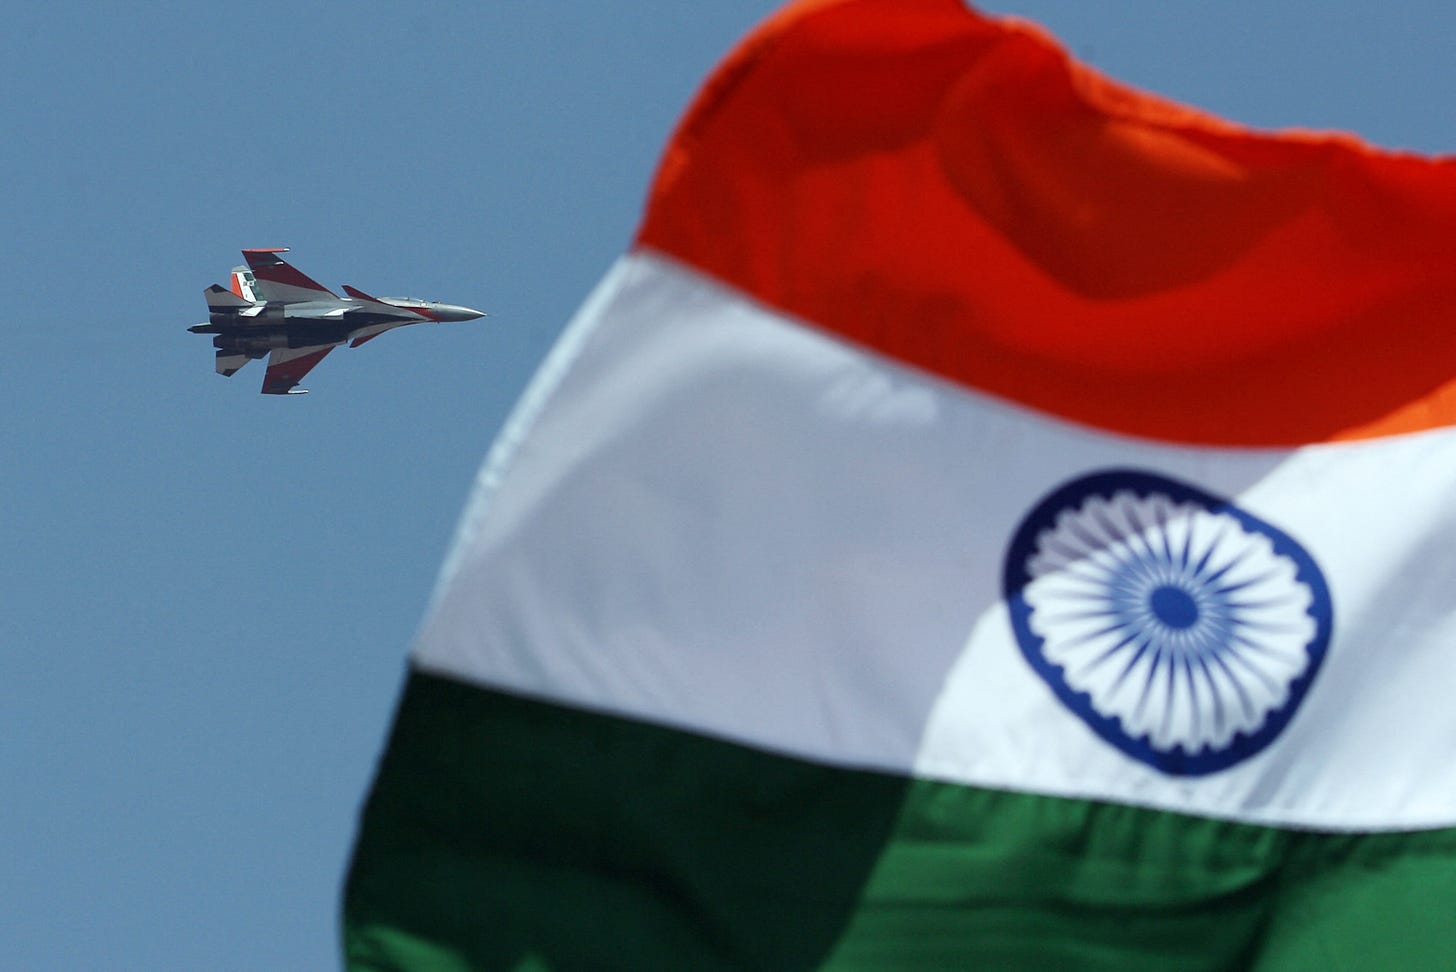 An Indian Air Force flies past an Indian flag in Bangalore, India.